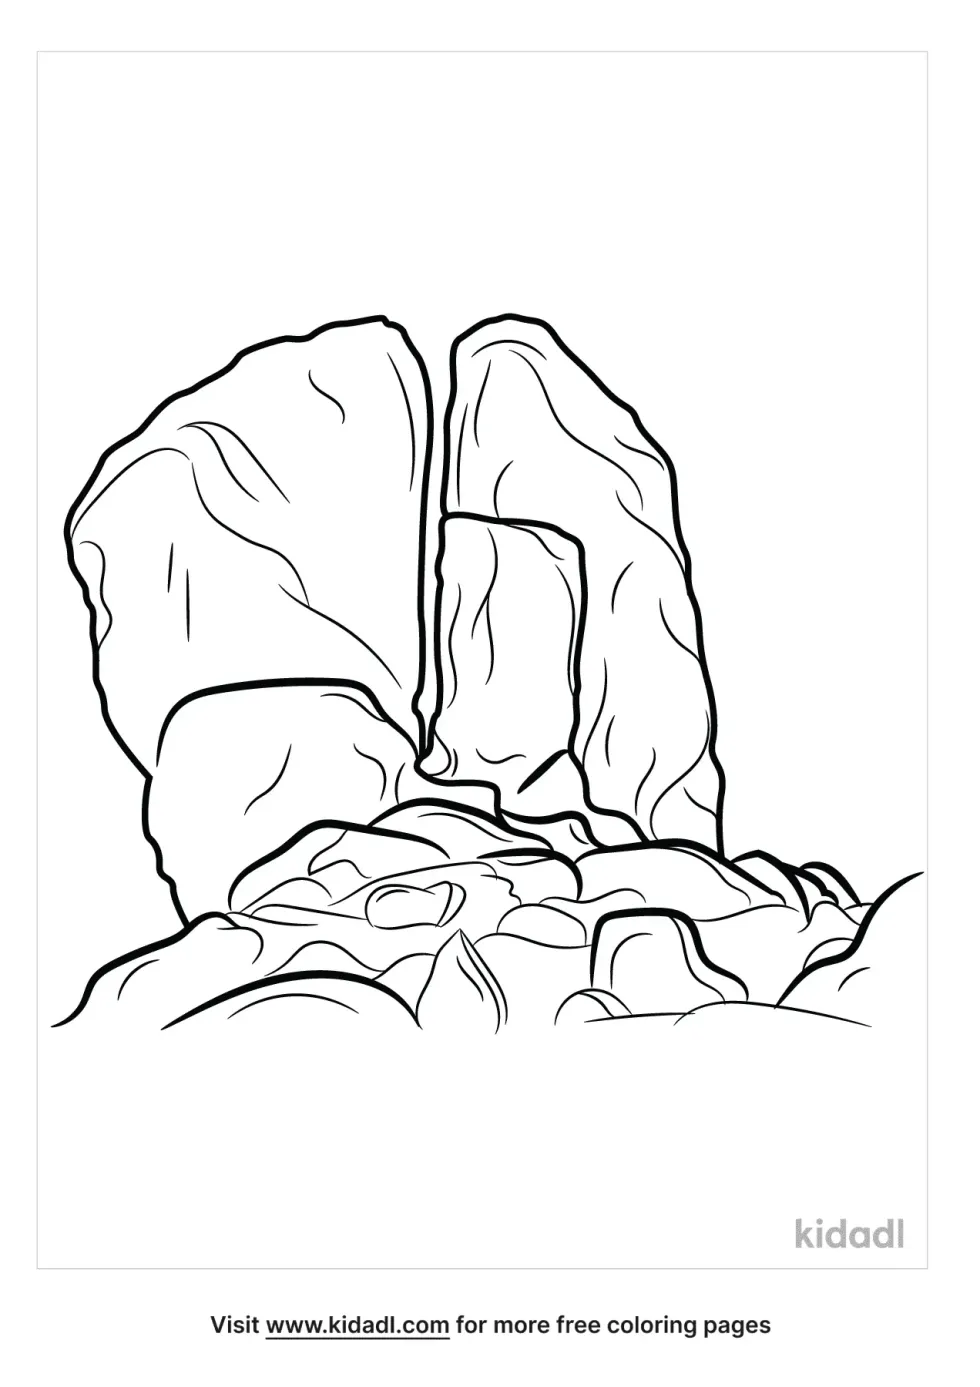 Rock Of Horeb Coloring Page